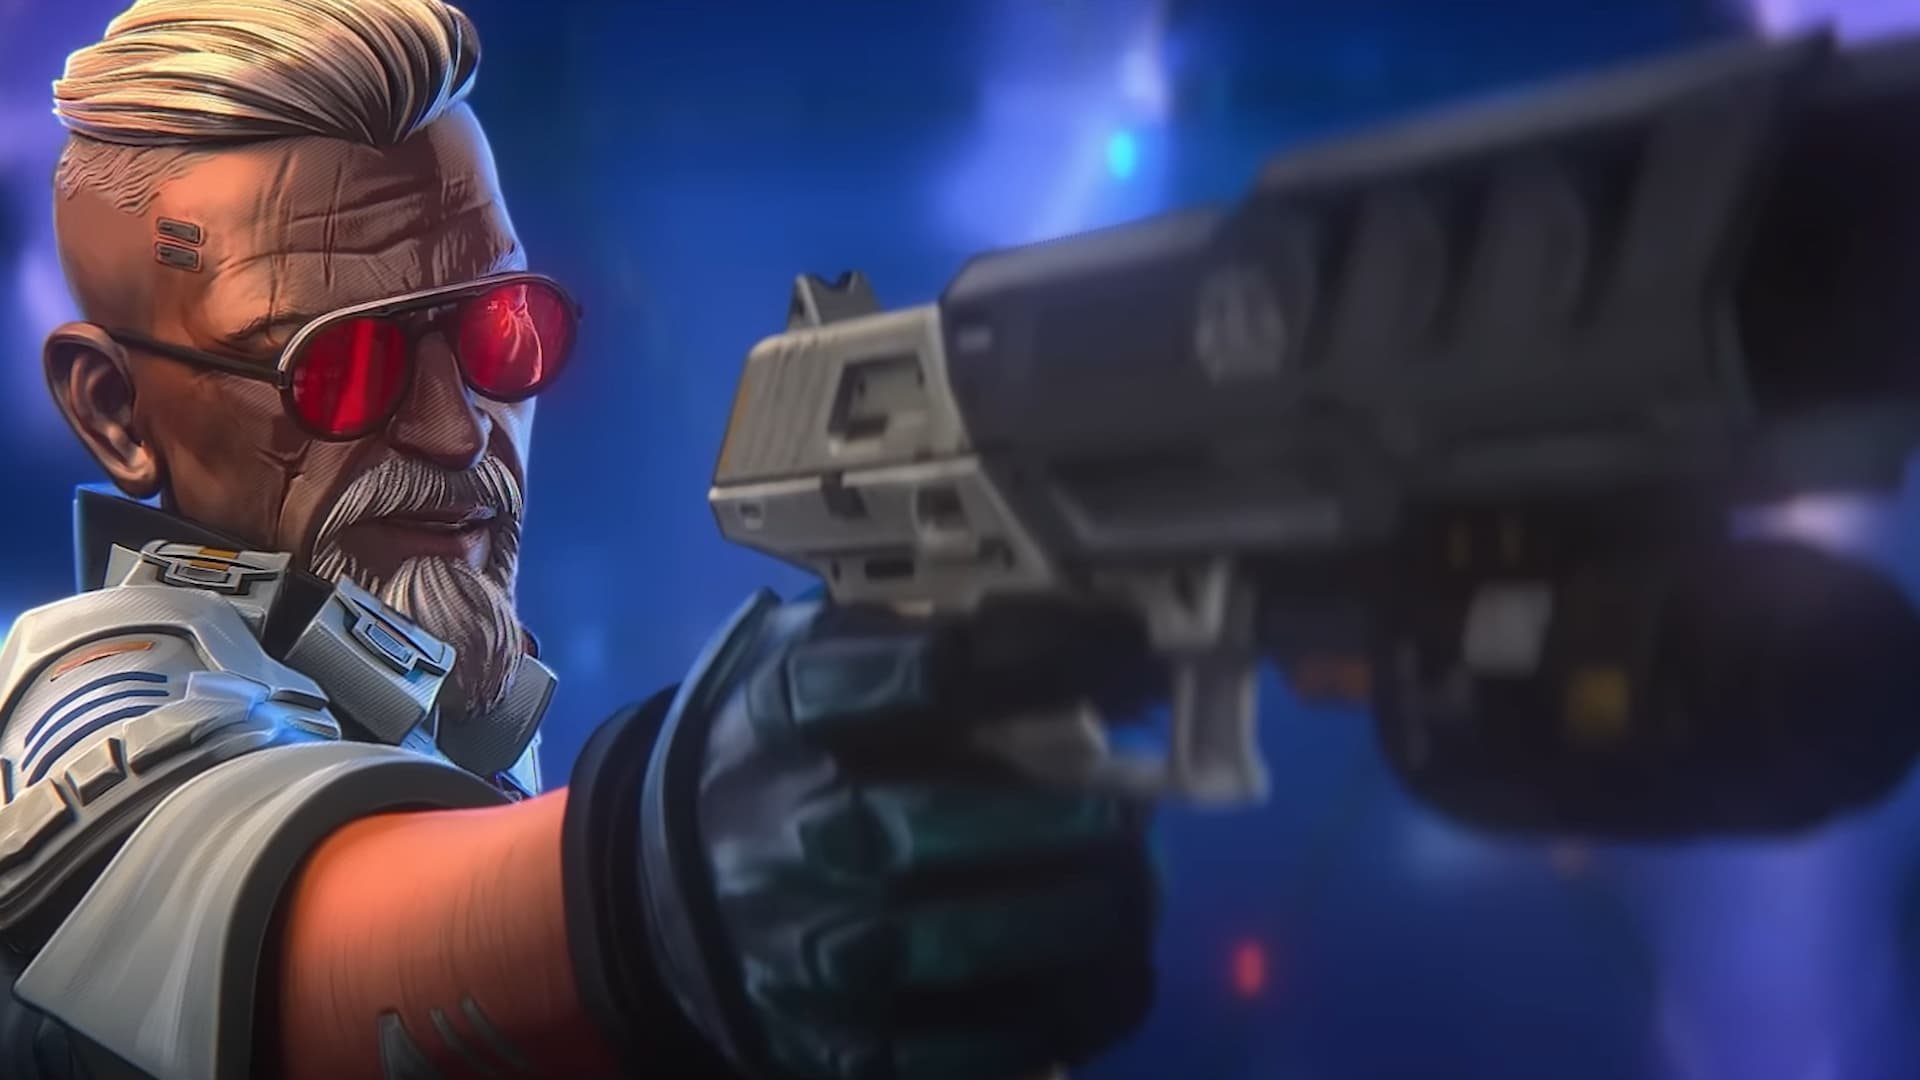 Apex Legends Ballistic -- This old man is armed to the teeth: man with grey hair and red sunglasses holding a gun